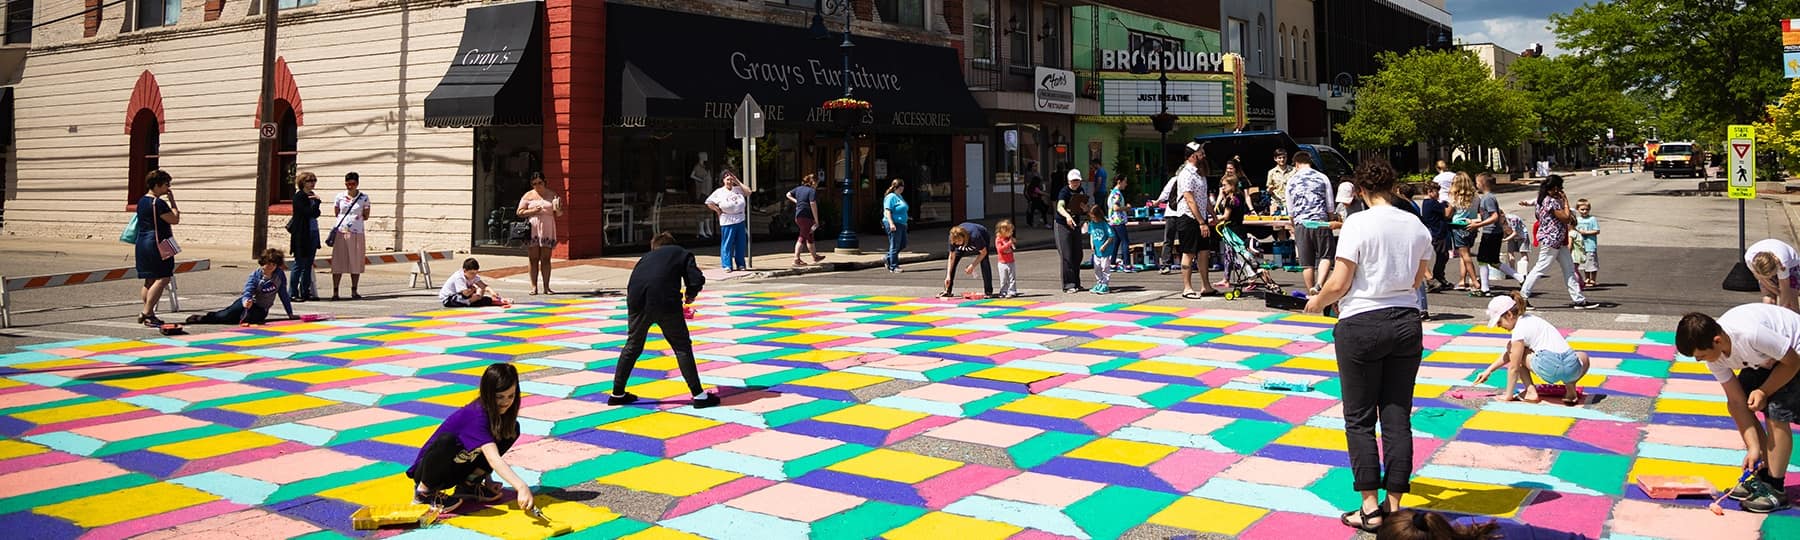 Families paint the street in bright blocks of color in downtown Mt. Pleasant